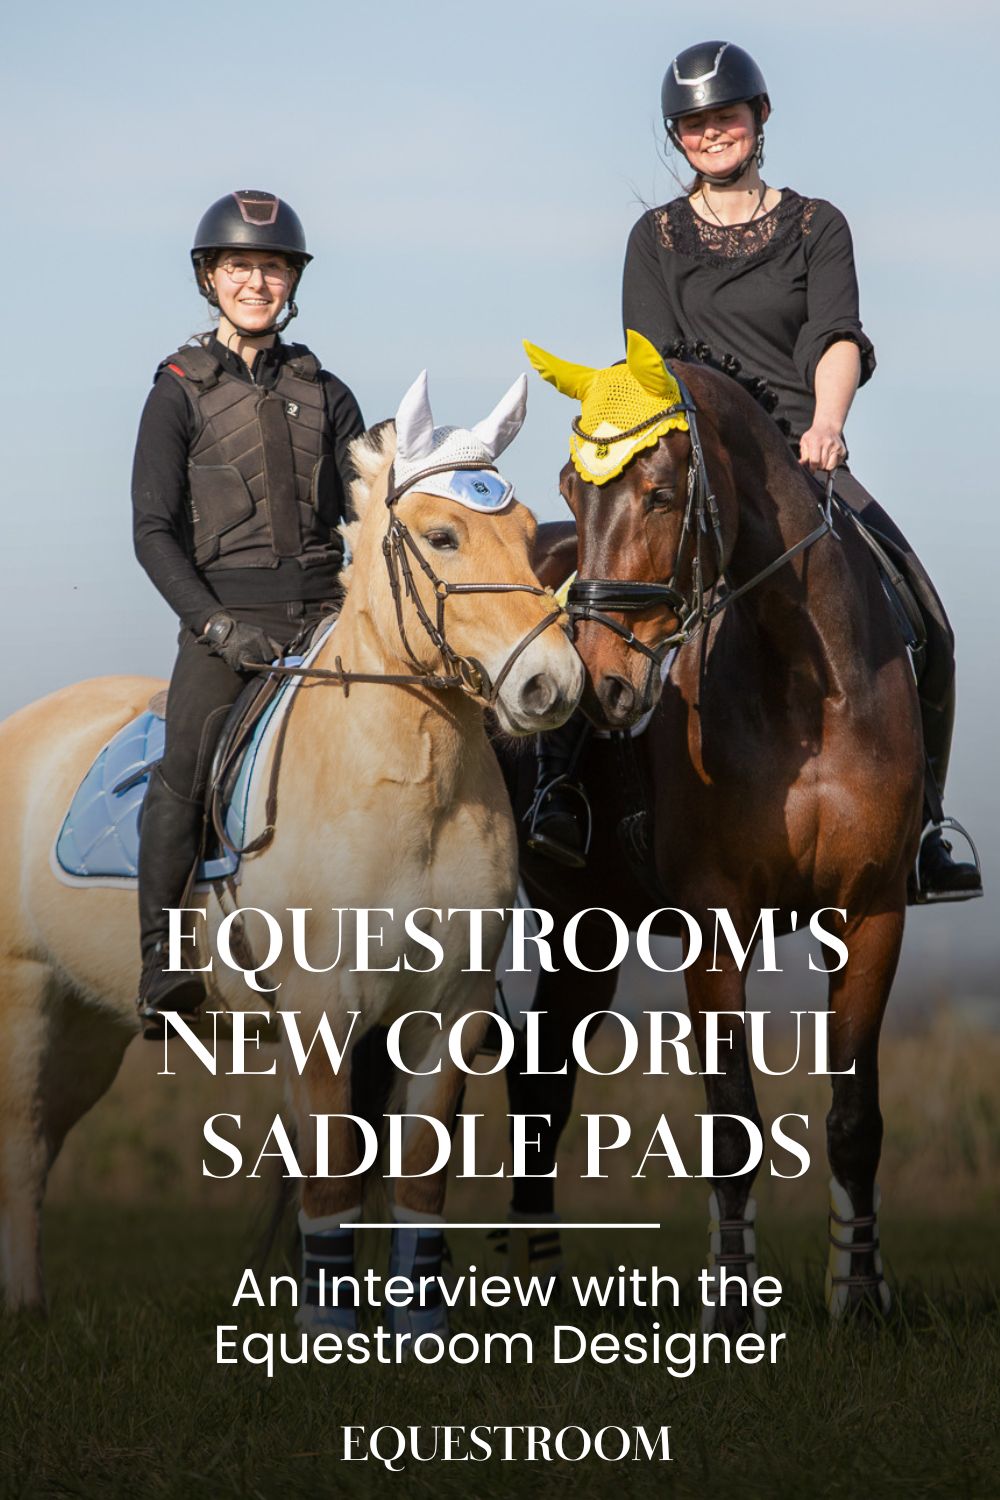 Equestroom's New Colorful Saddle Pads for English Riders